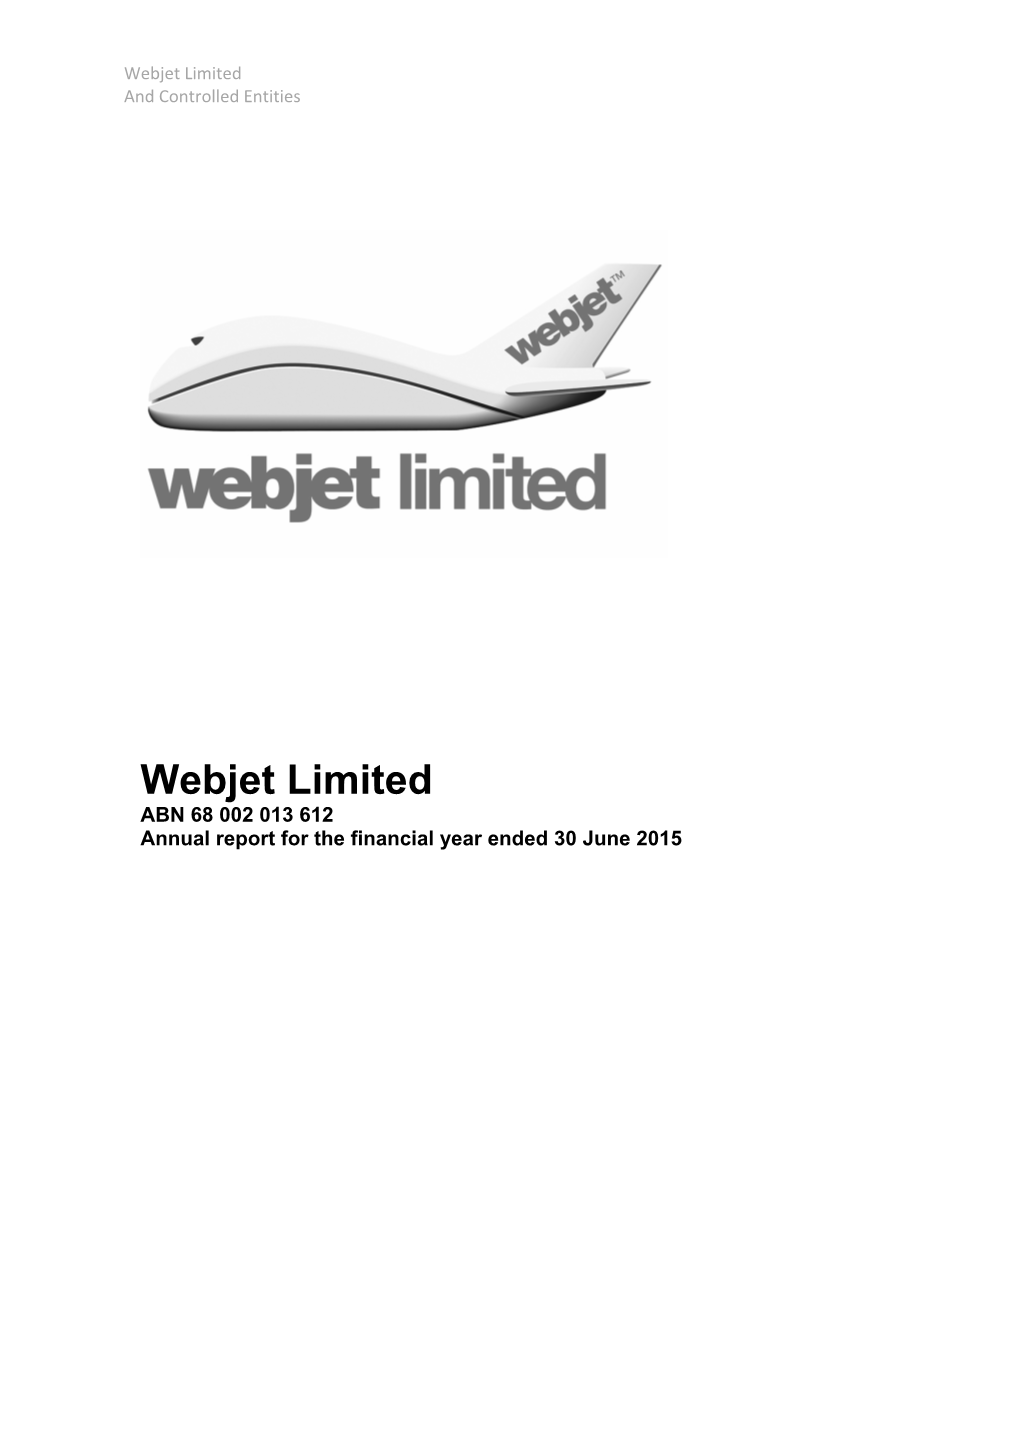 Webjet Limited and Controlled Entities